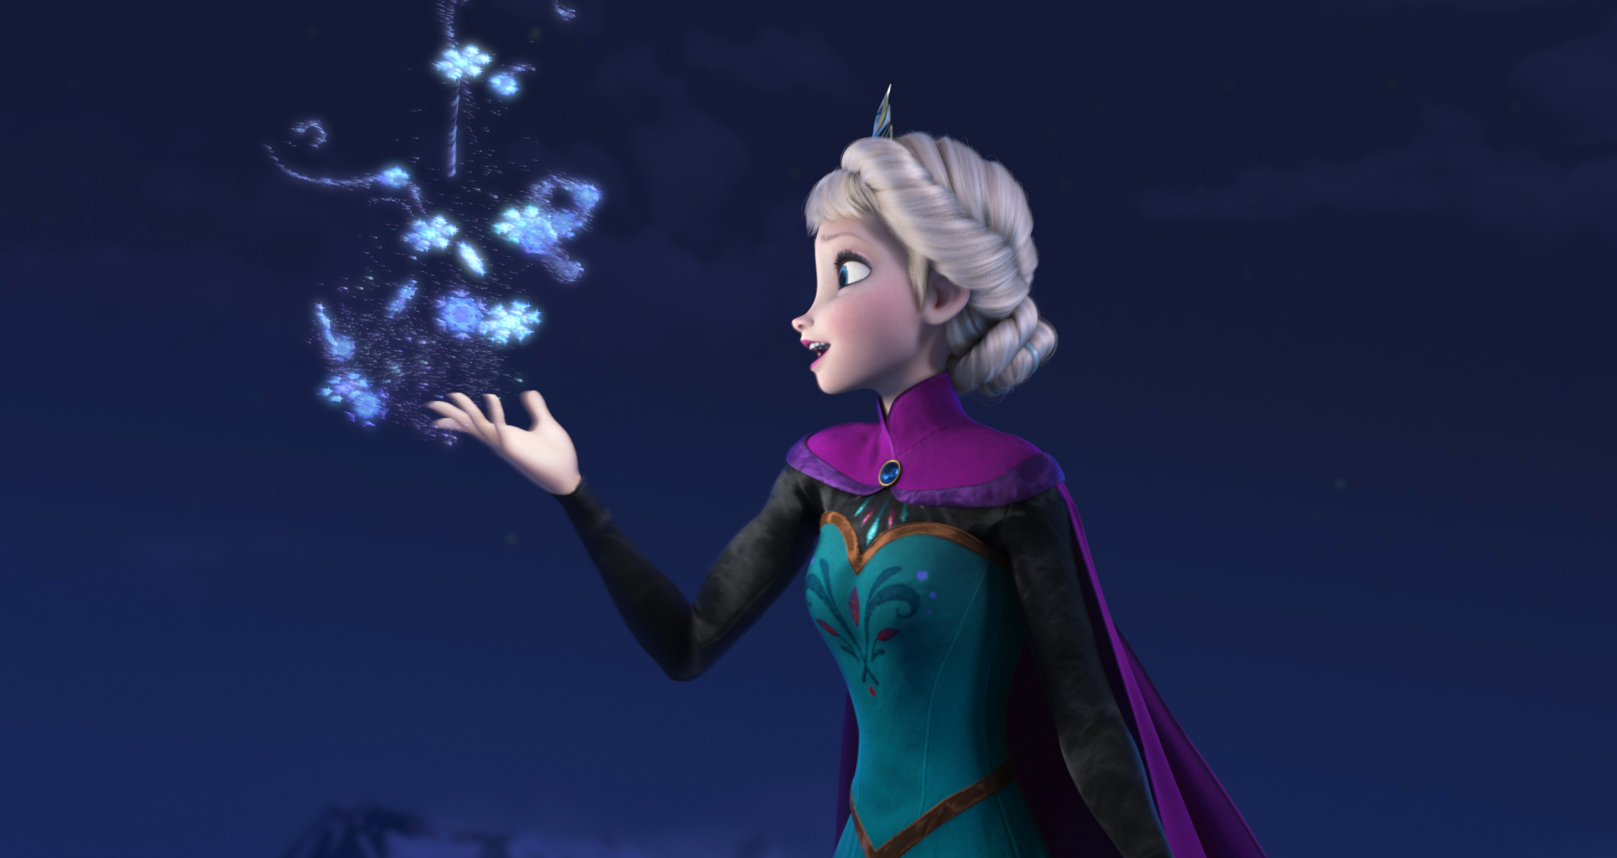 This image released by Disney shows Elsa the Snow Queen, voiced by Idina Menzel, in a scene from the animated feature "Frozen". Photo: AP